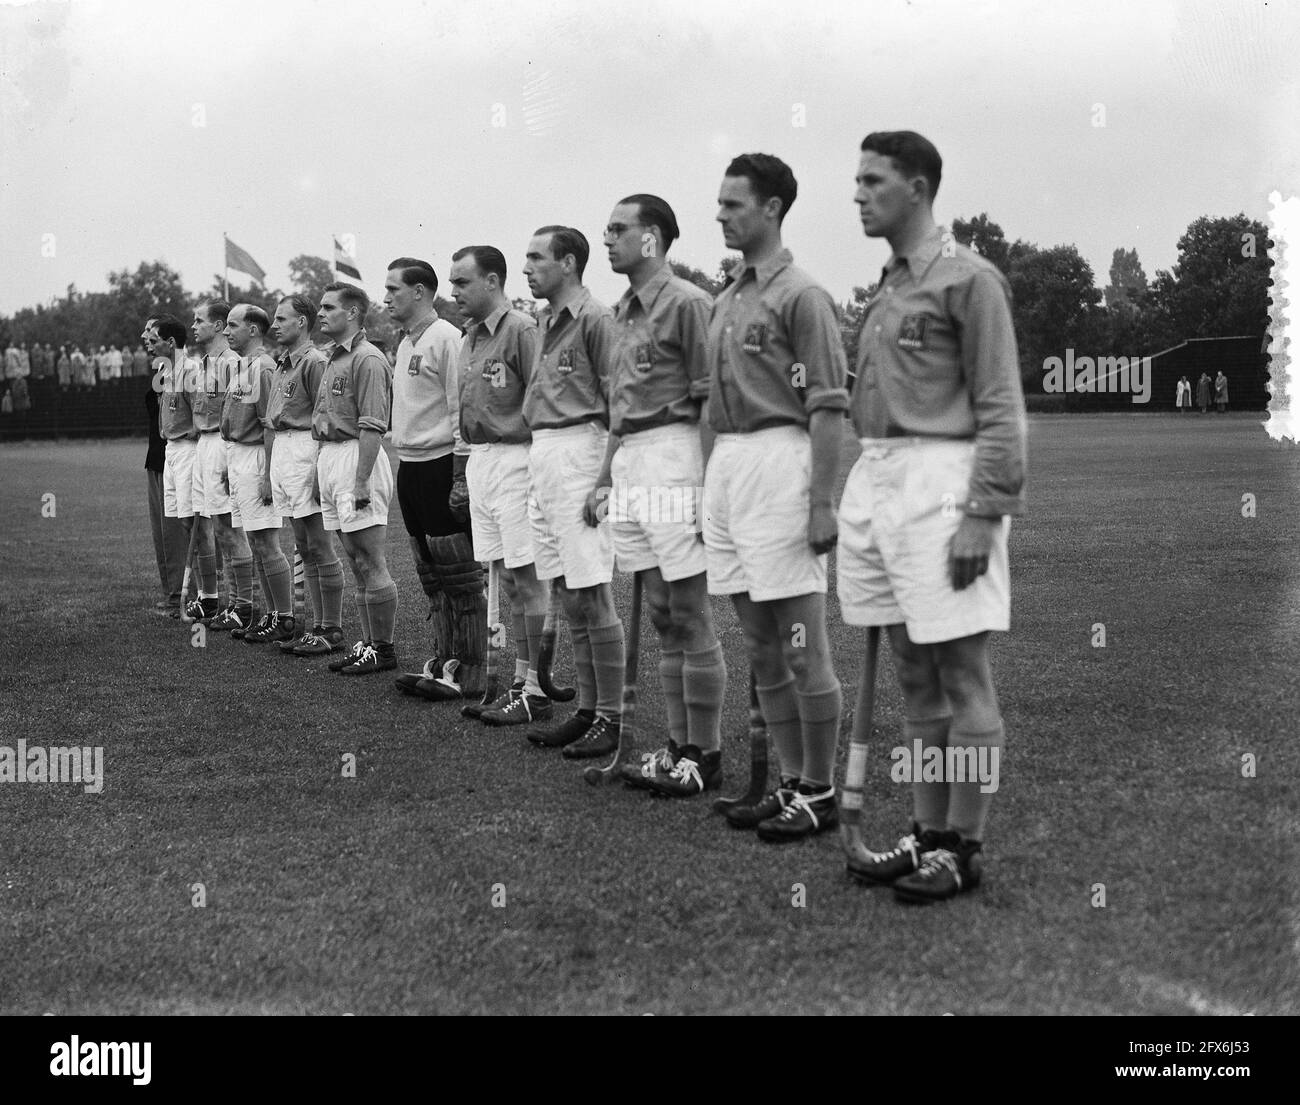 Hockey Netherlands against Switzerland. Kop Van Tiel, June 15, 1952, field hockey, The Netherlands, 20th century press agency photo, news to remember, documentary, historic photography 1945-1990, visual stories, human history of the Twentieth Century, capturing moments in time Stock Photo